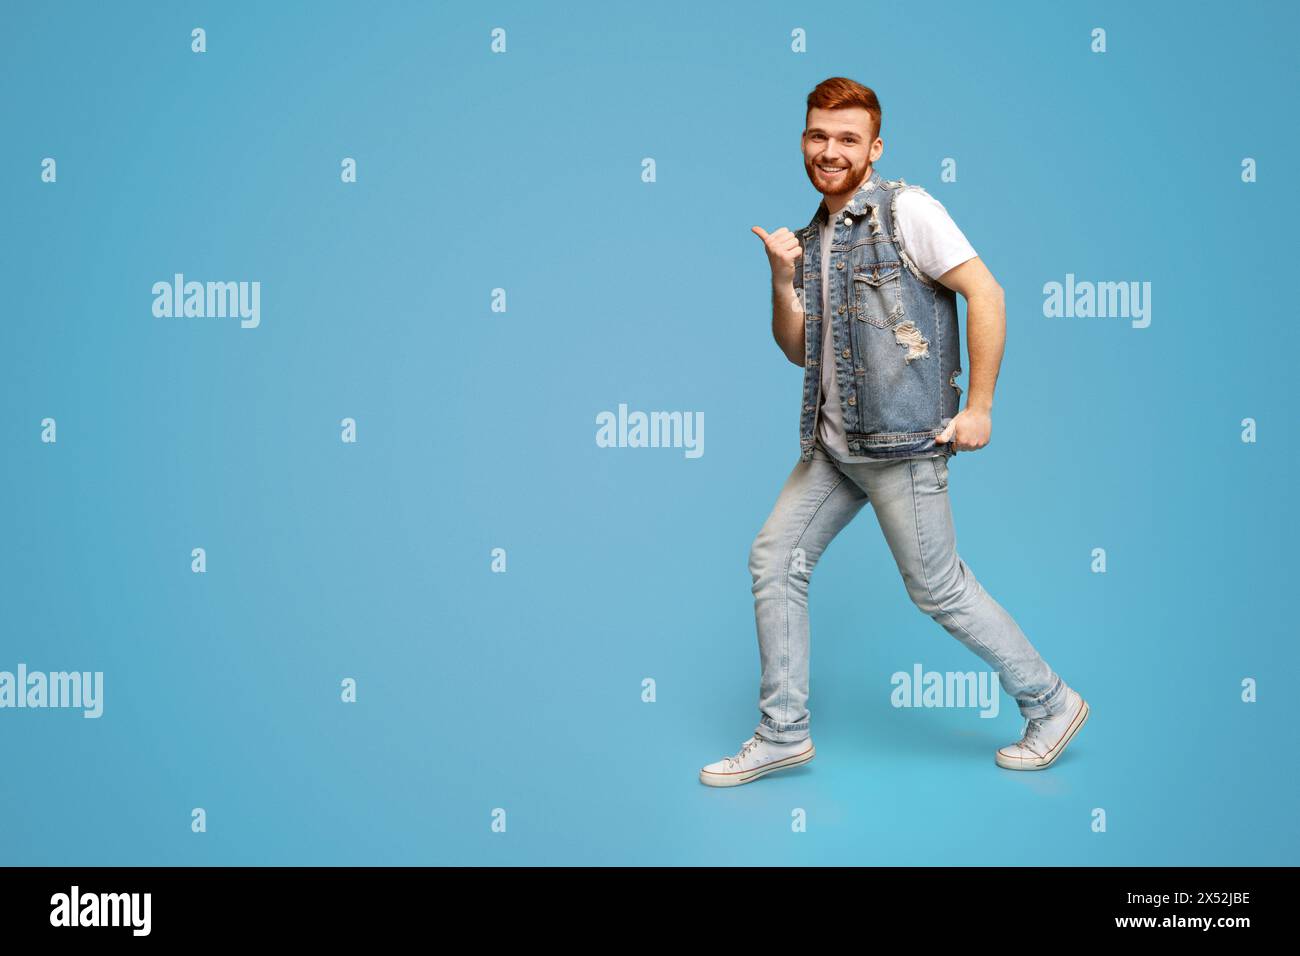 Cool millennial man dancing with thumbs up gestures in studio Stock Photo